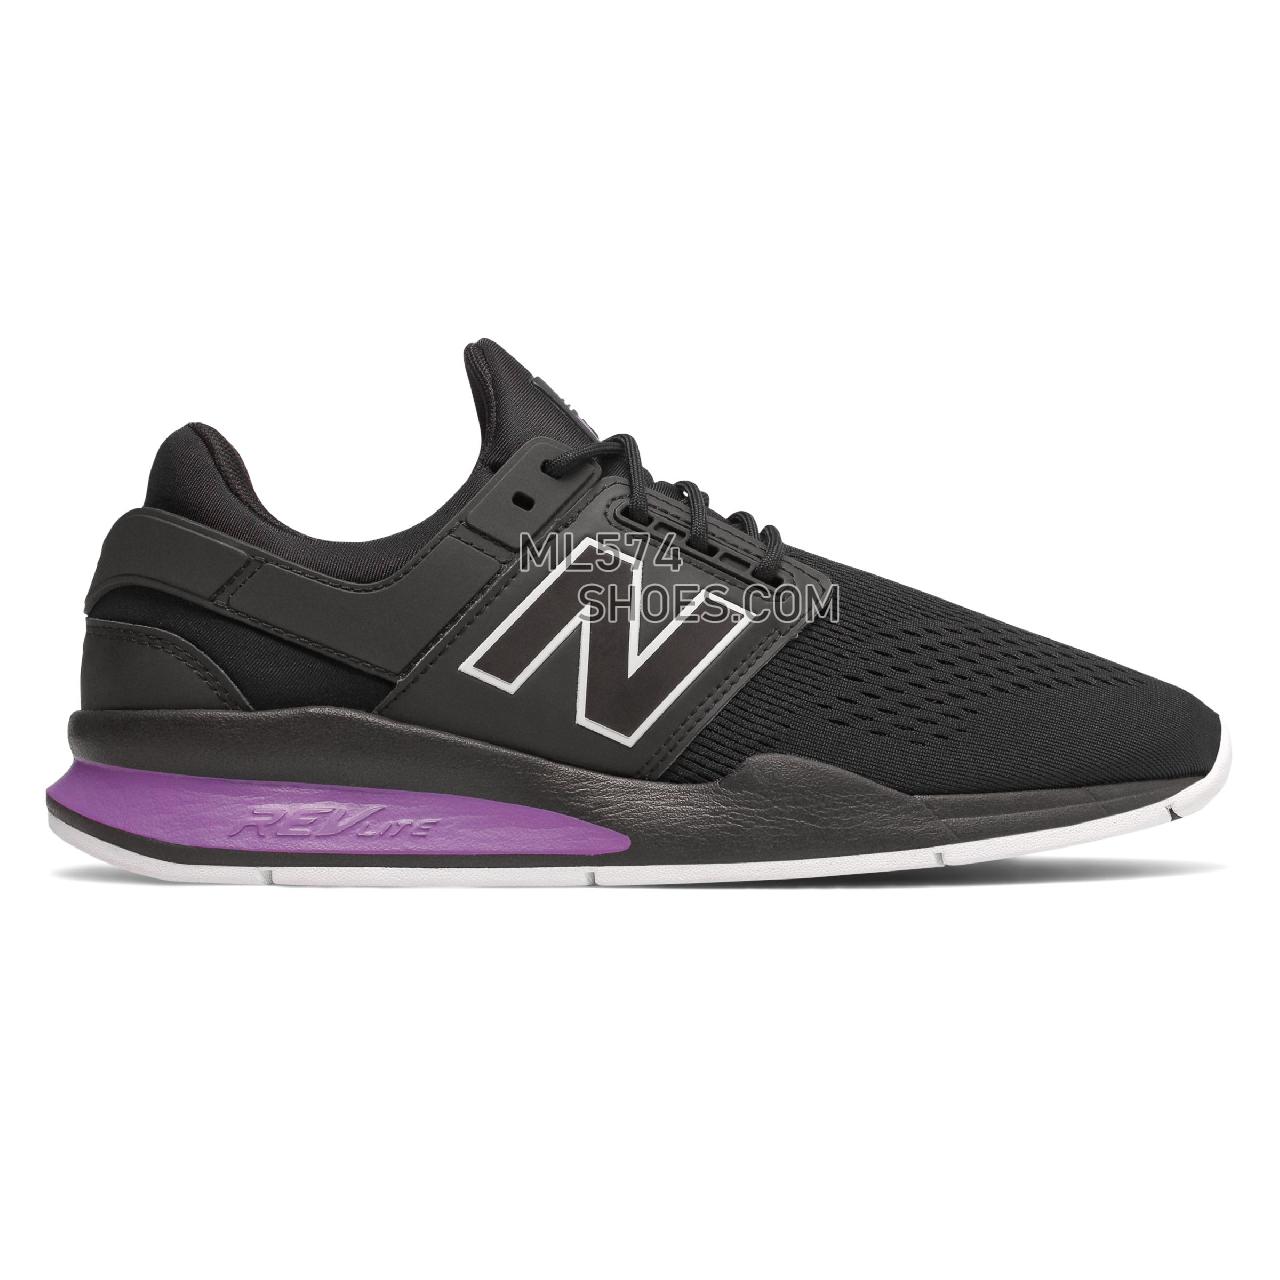 New Balance 247 - Men's 247 - Classic Black with Faded Violet - MS247TO